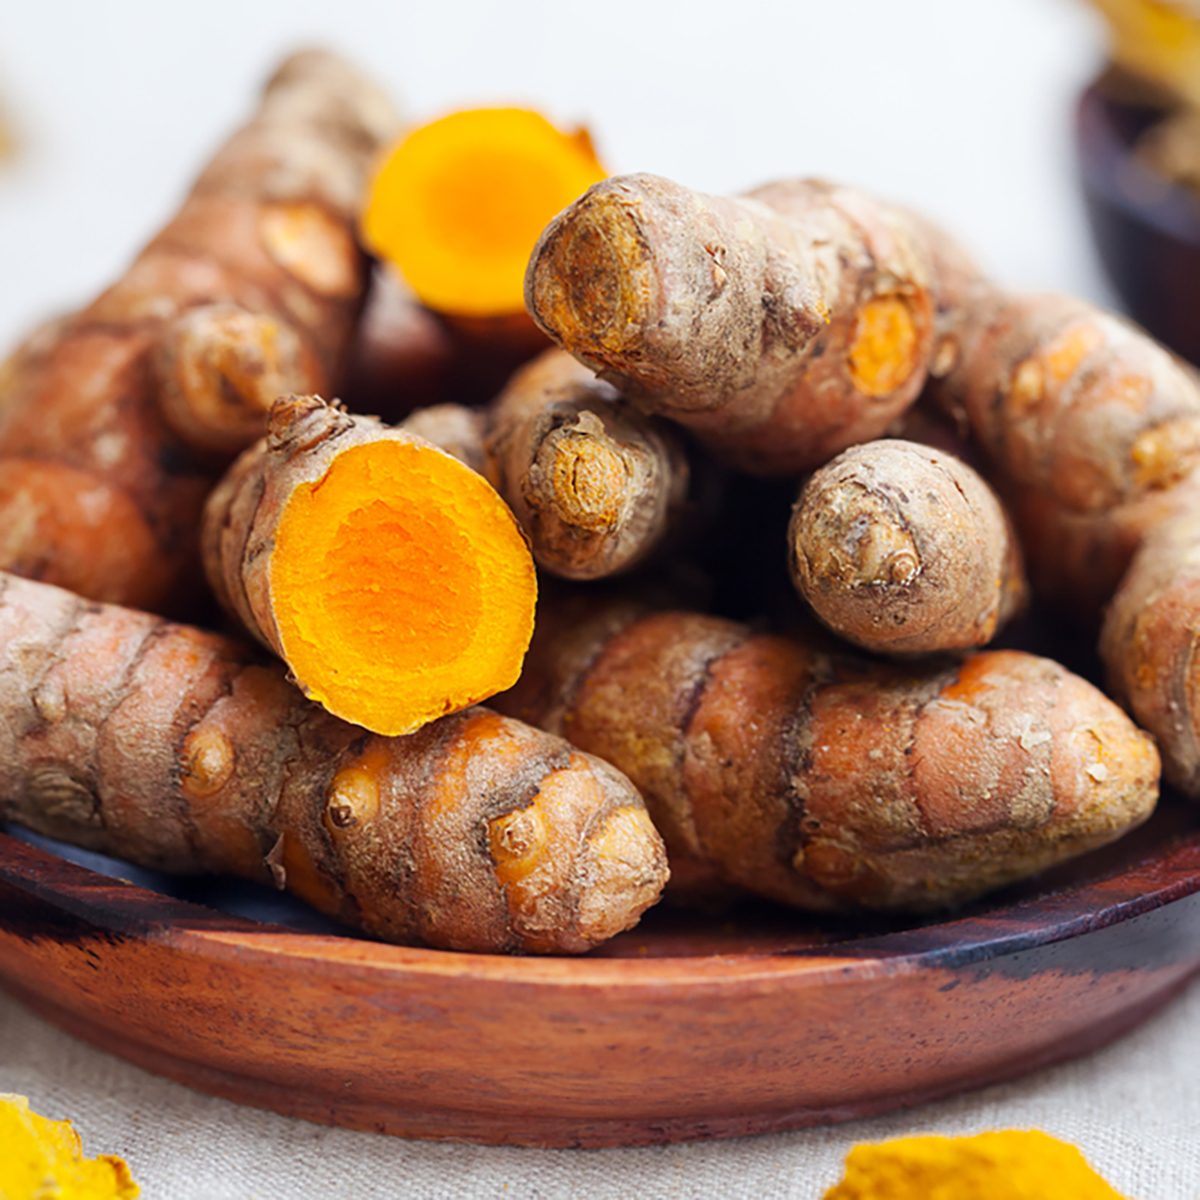 Fresh and dried turmeric roots in a wooden bowl. Grey textile background.